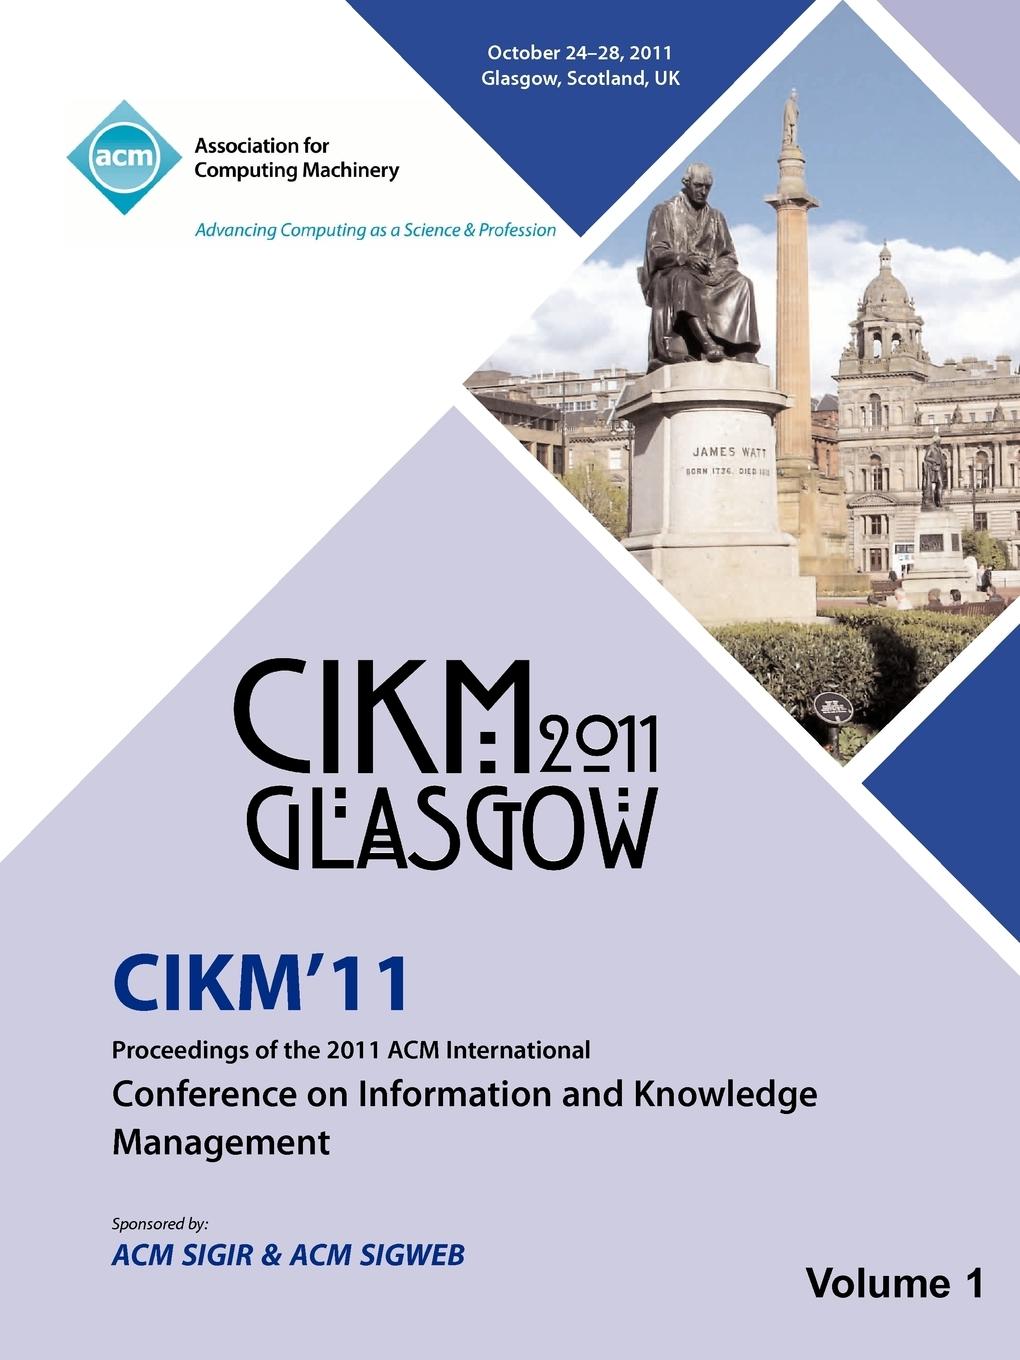 CIKM 11 Proceedings of the 2011 ACM International Conference on Information and Knowledge Management Vol1 - Cikm 11 Conference Committee